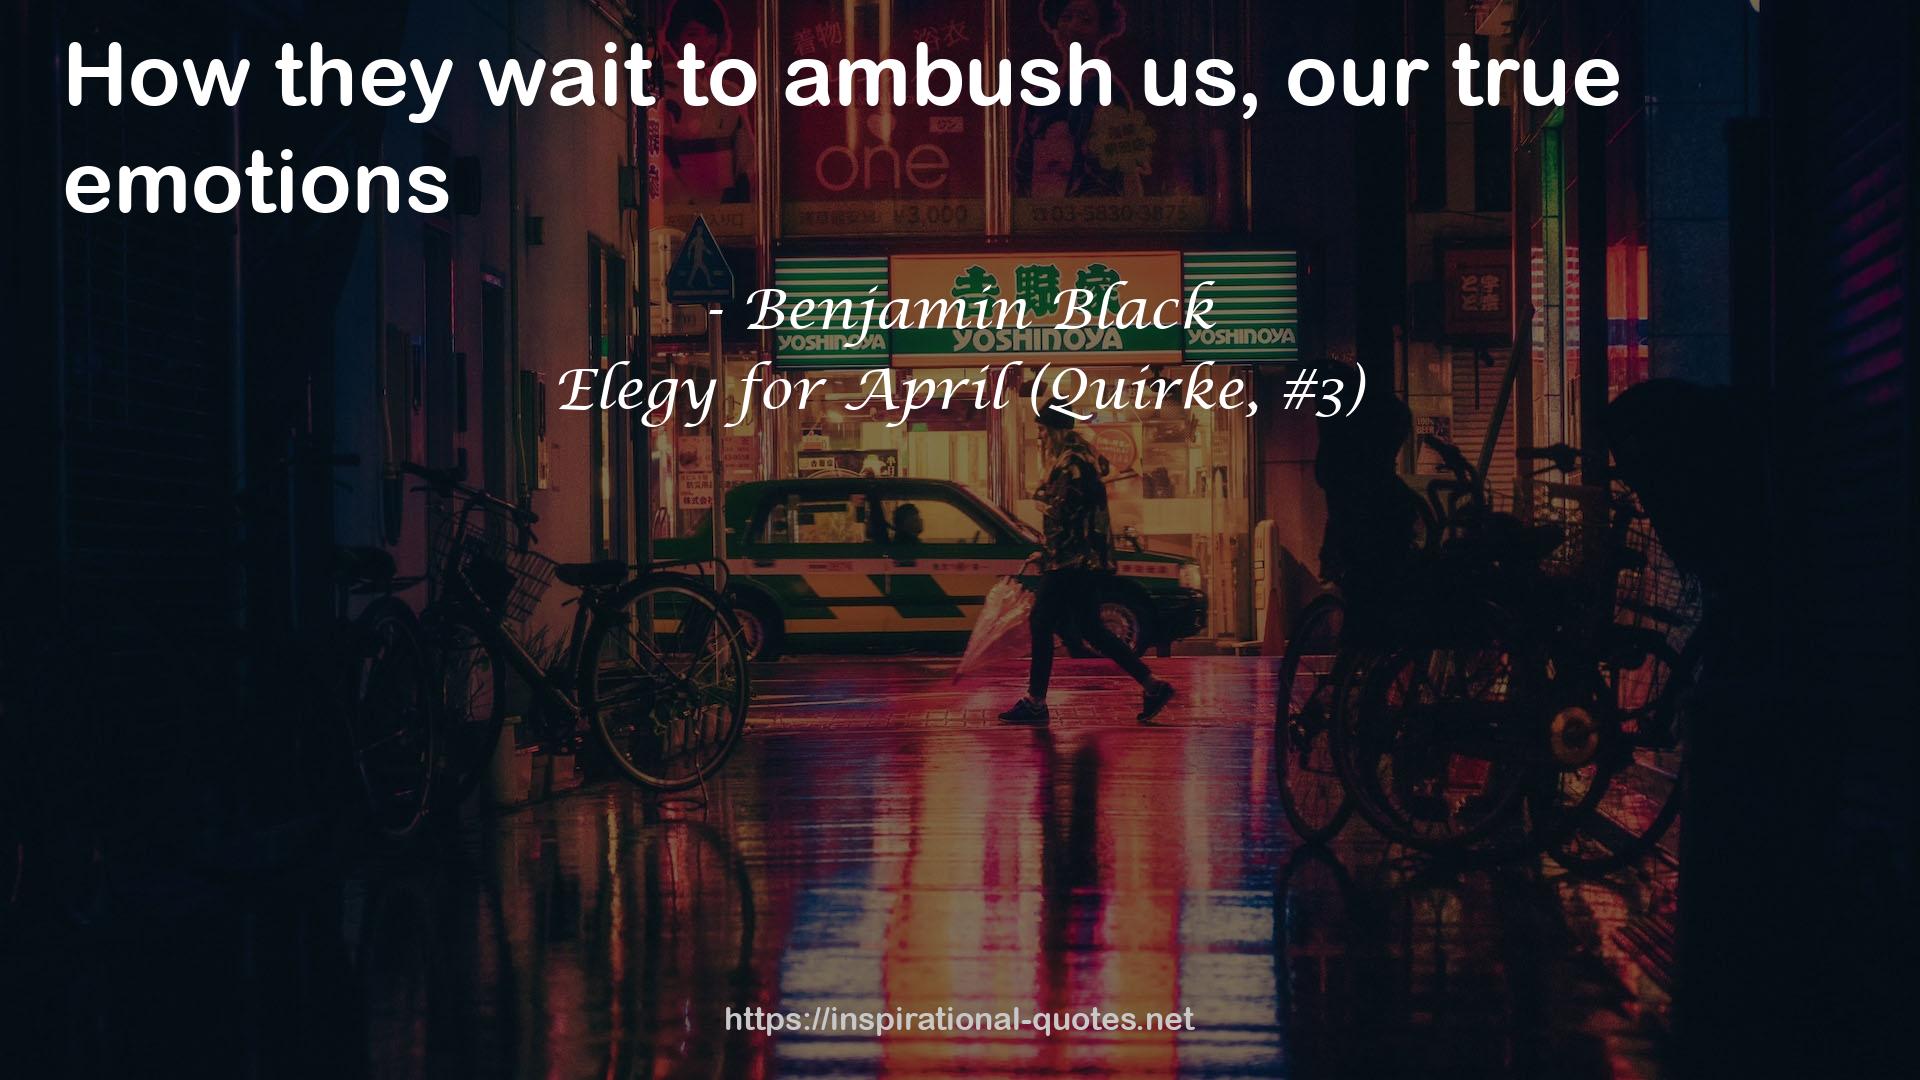 Elegy for April (Quirke, #3) QUOTES